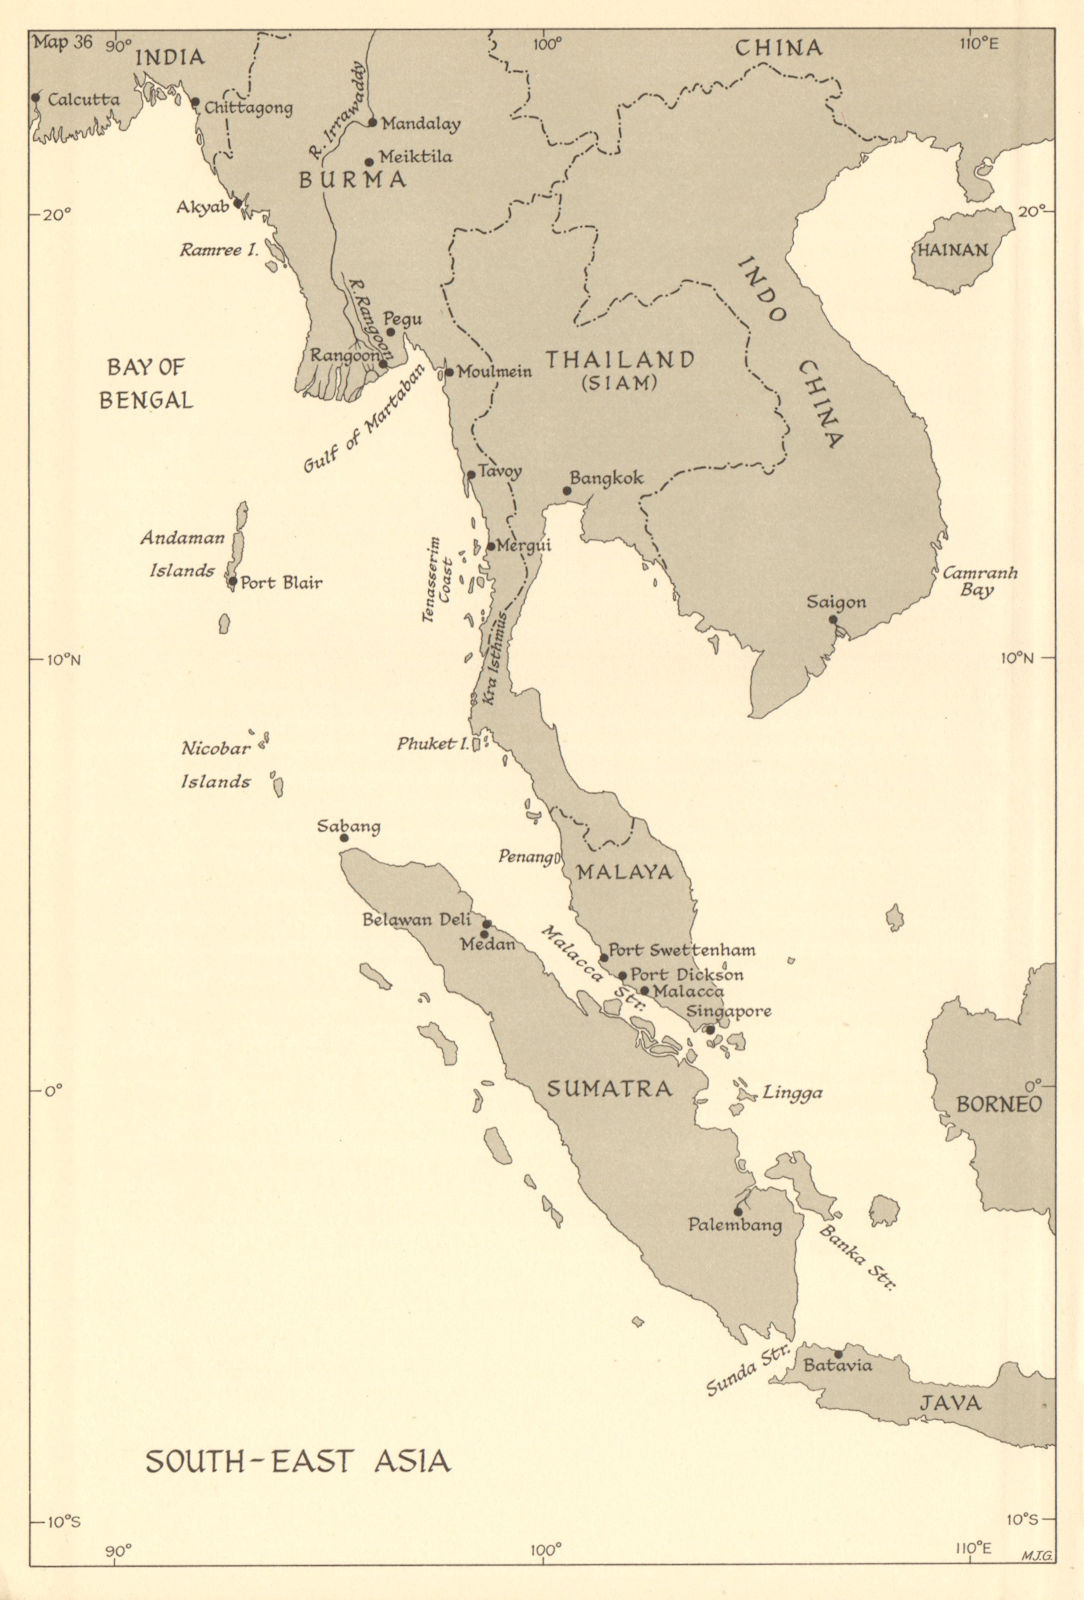 Associate Product South-East Asia. Indochina in 1944. Ports. World War 2 naval campaigns 1961 map